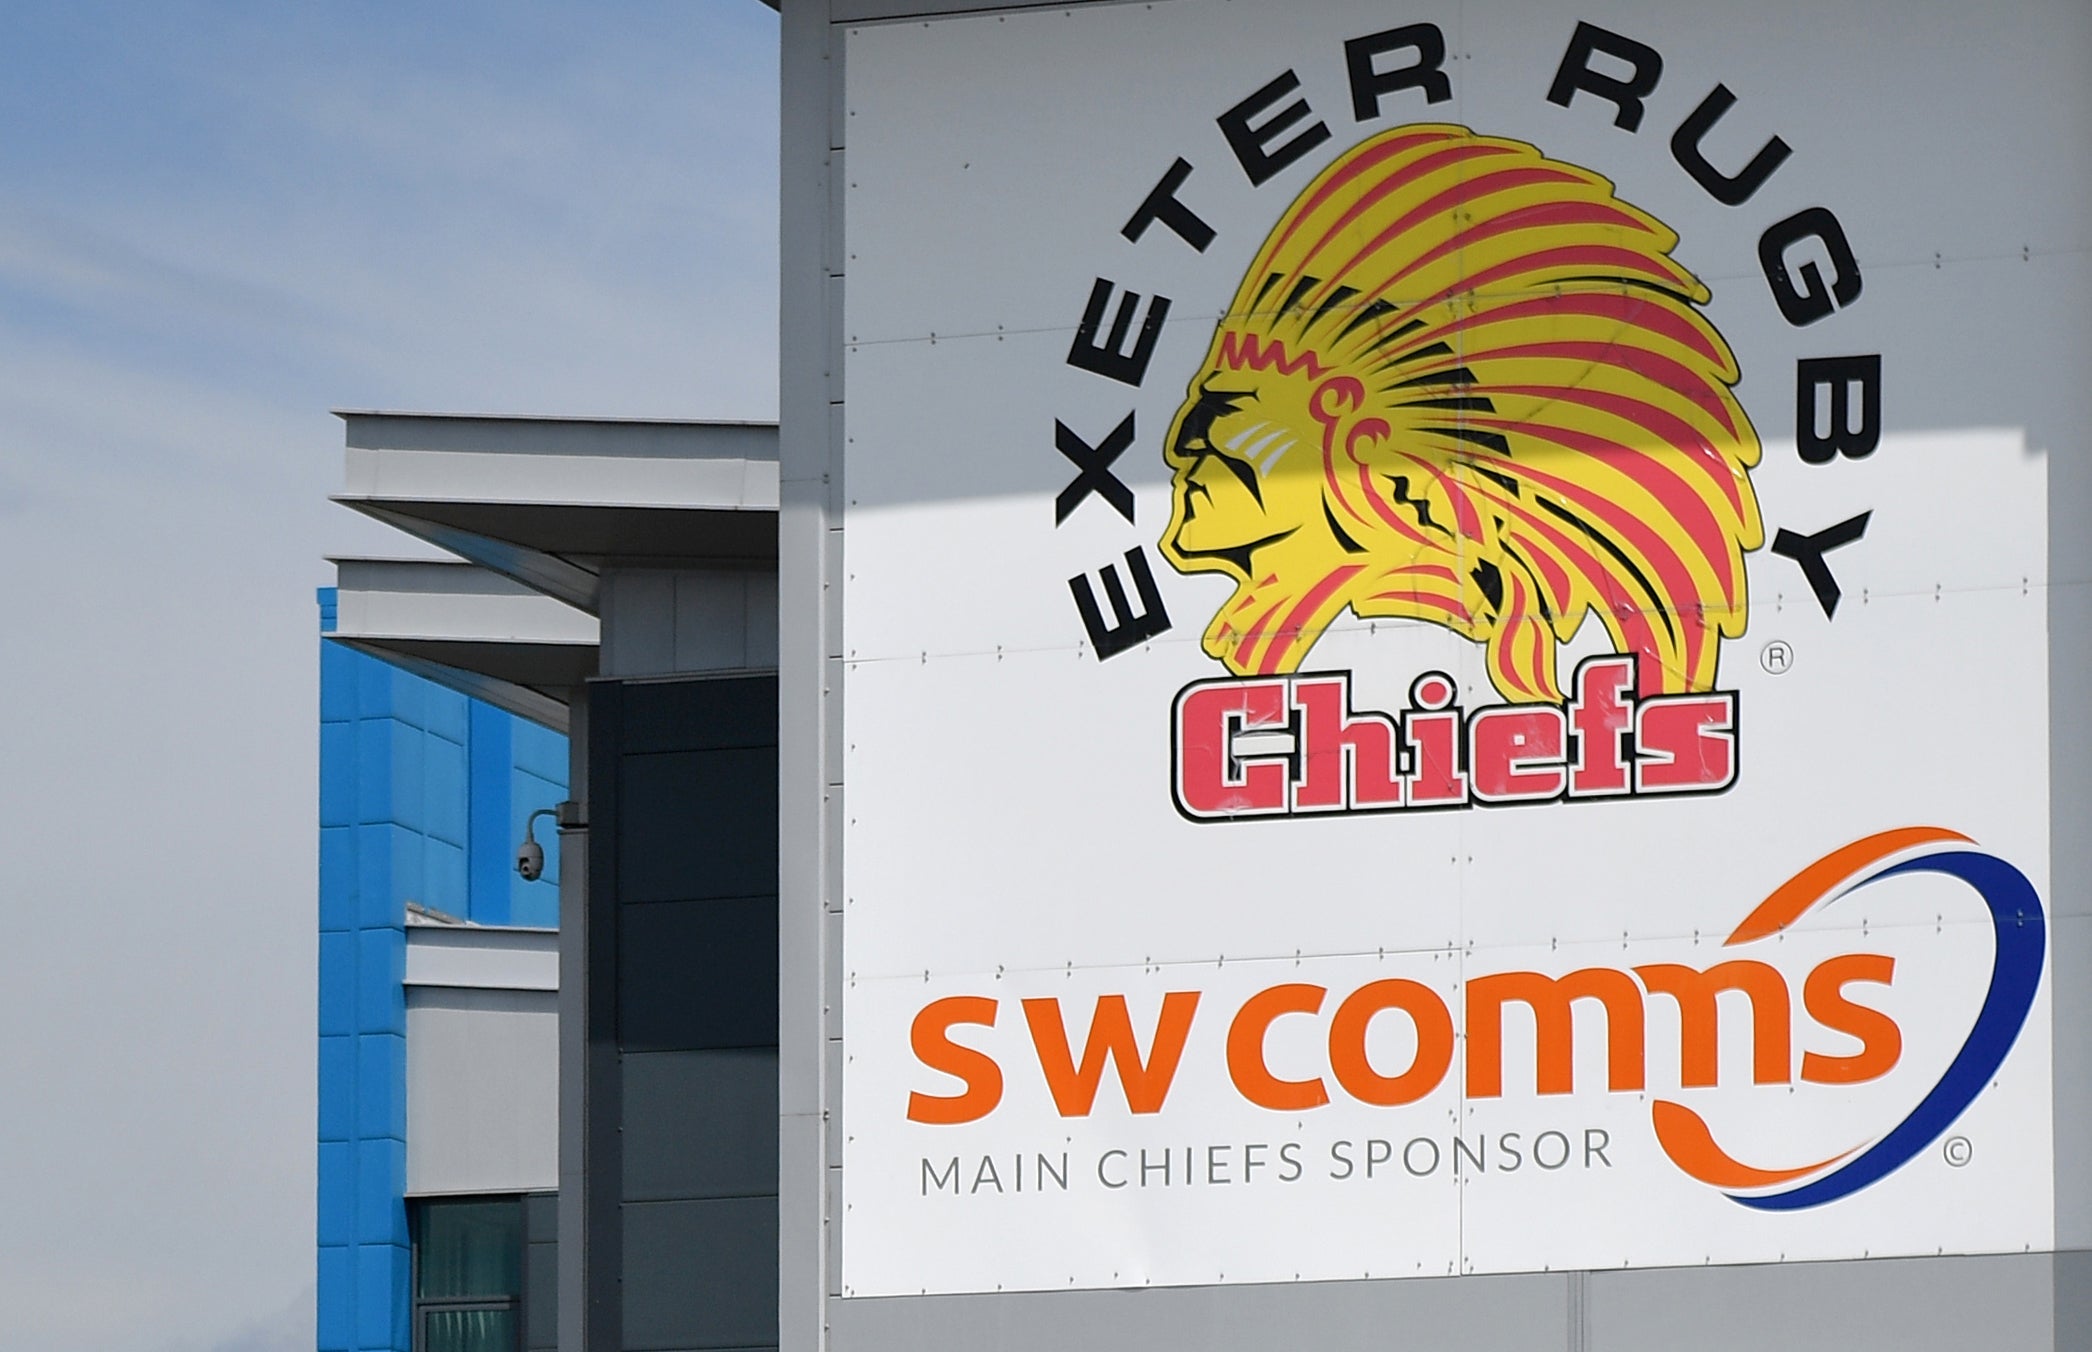 Exeter Chiefs are rebranding